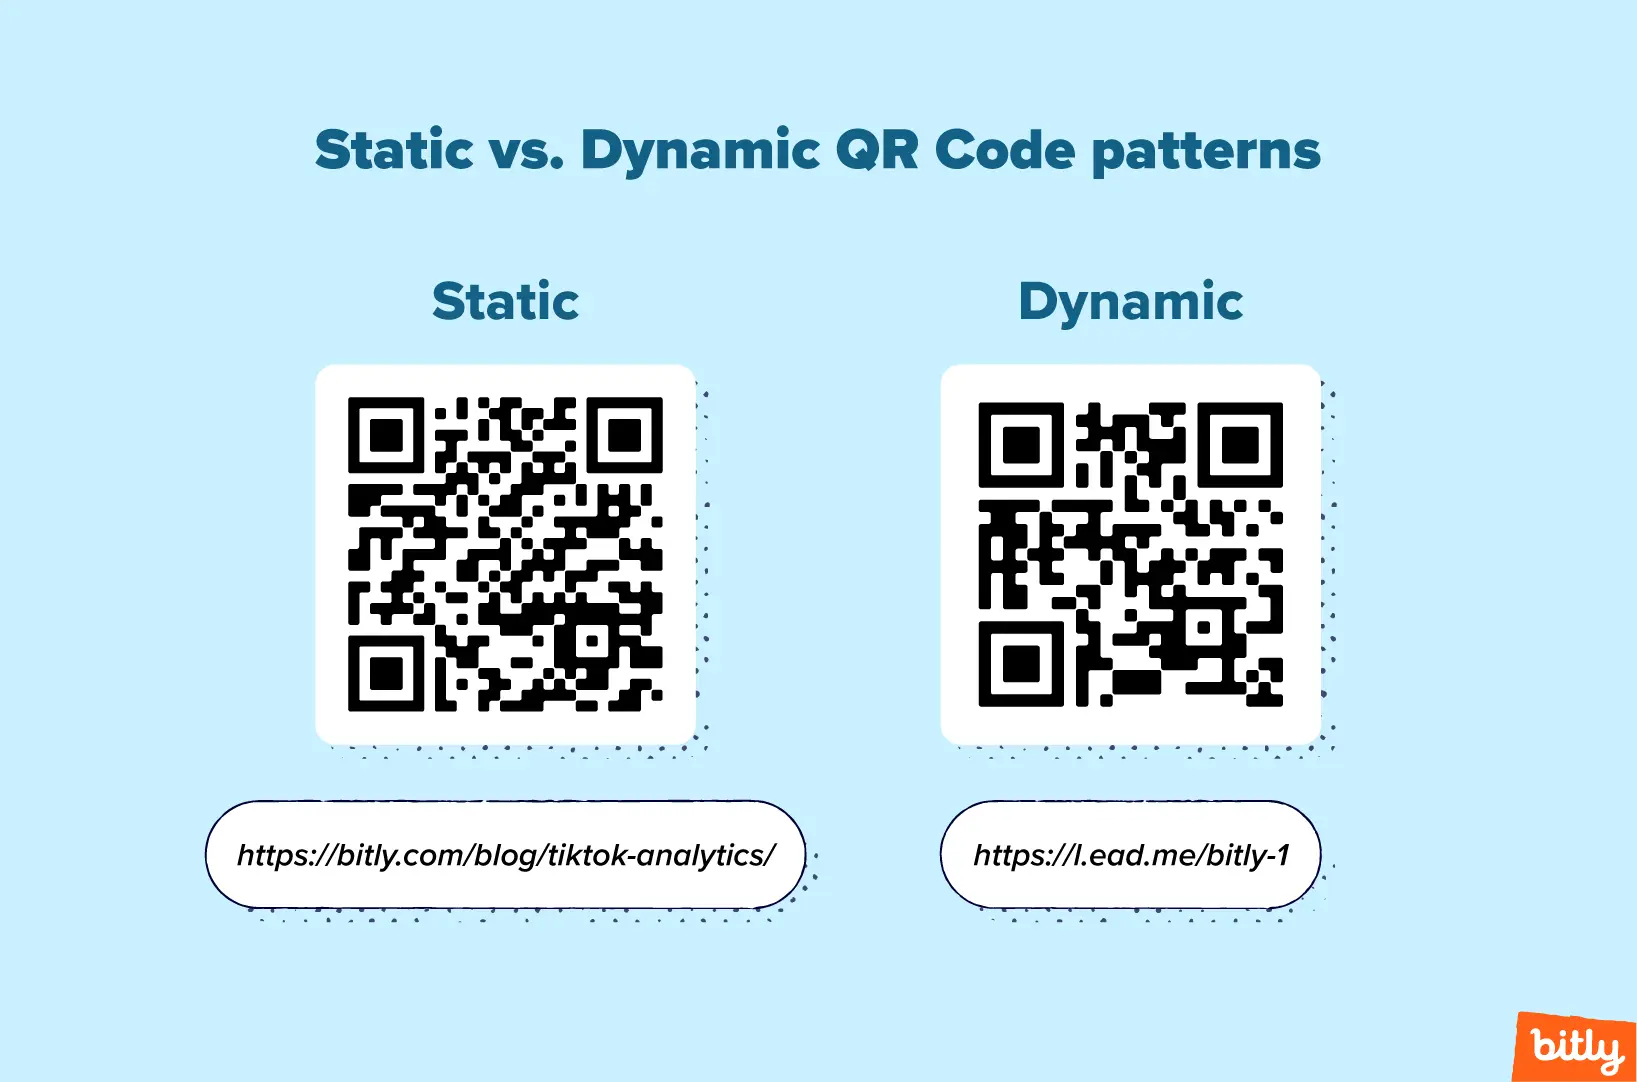 A graphic showing the difference between a Static and a Dynamic QR Code.